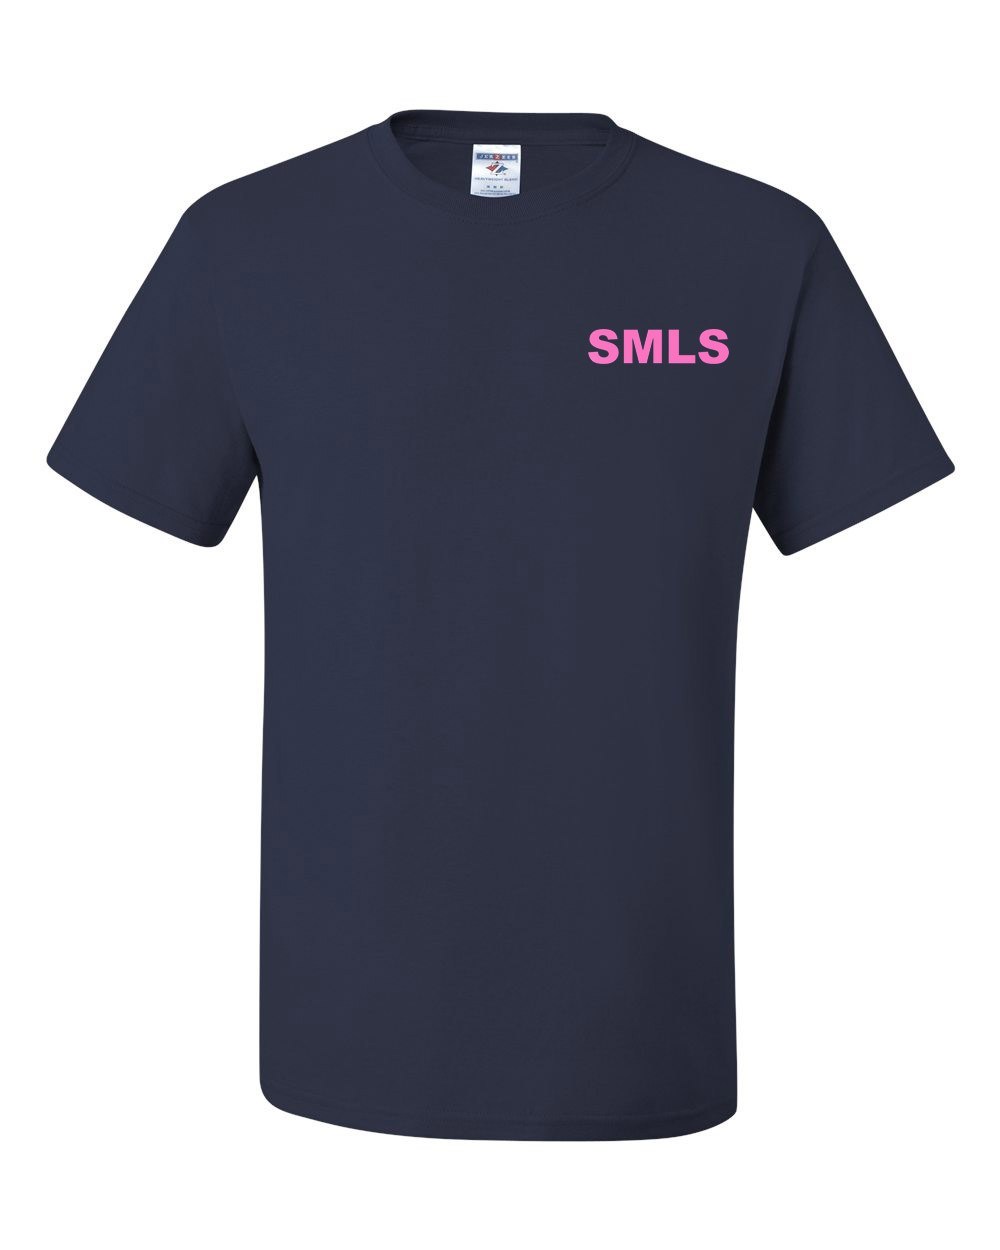 SMLS S/S Staff T-Shirt w/ SMLS Spirit Logo - Please Allow 2-3 Weeks for ...